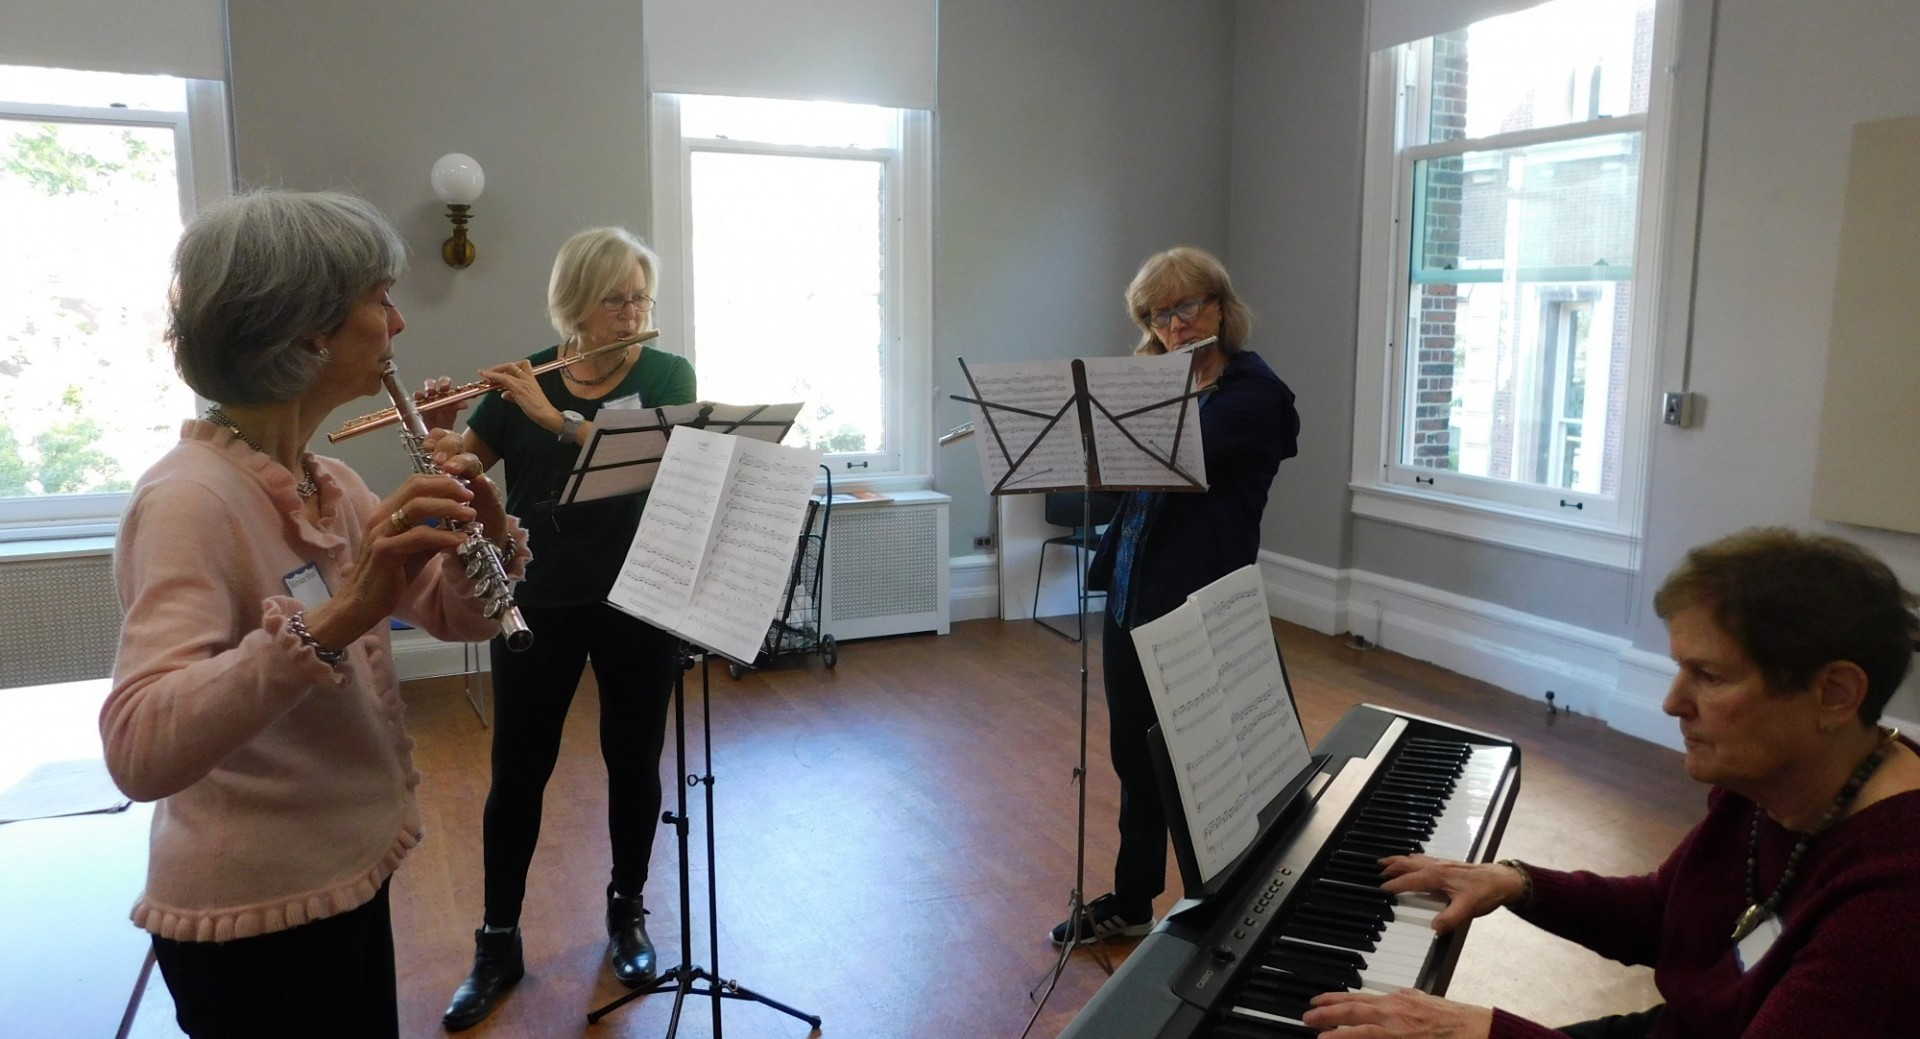 4 women playing instruments, flutes and keyboard